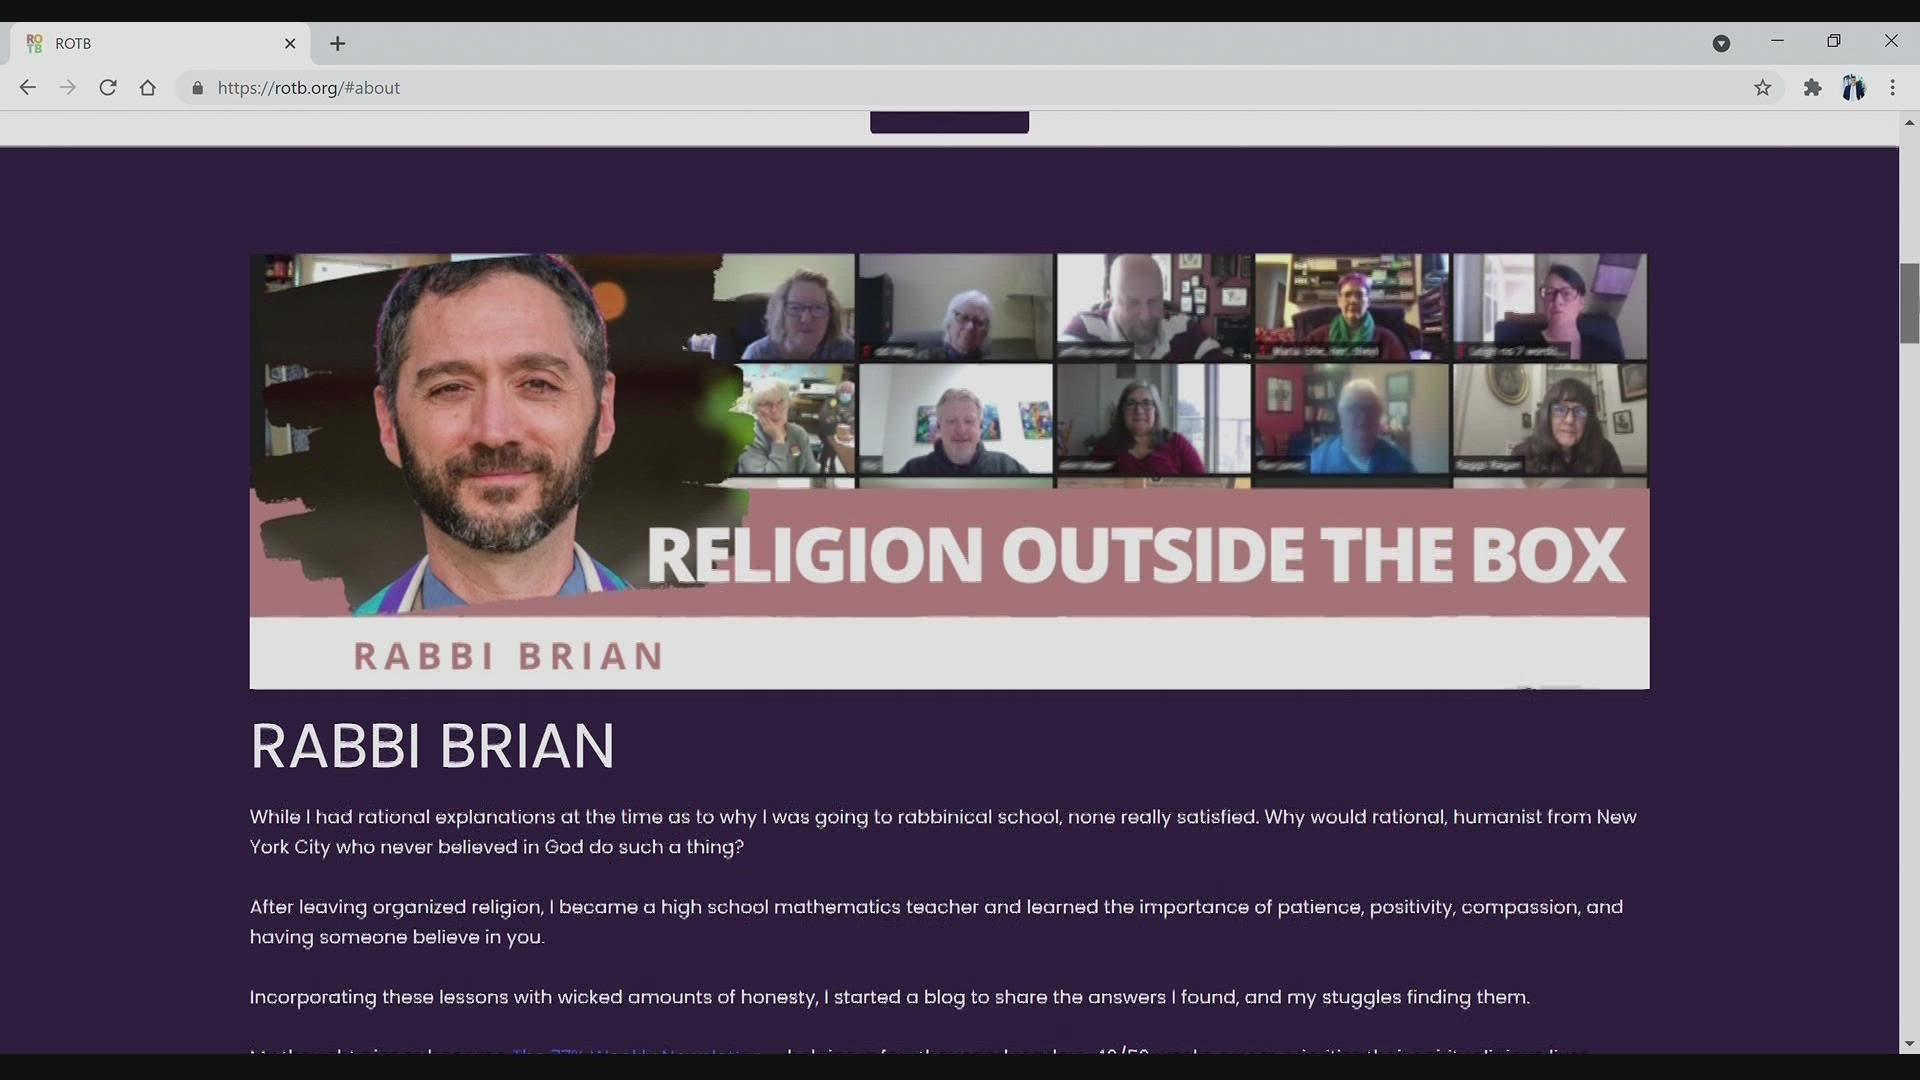 Rabbi Brian has an online church called 'Religion Outside the Box.' He has been working to help children and adults deal with anxiety during the pandemic.